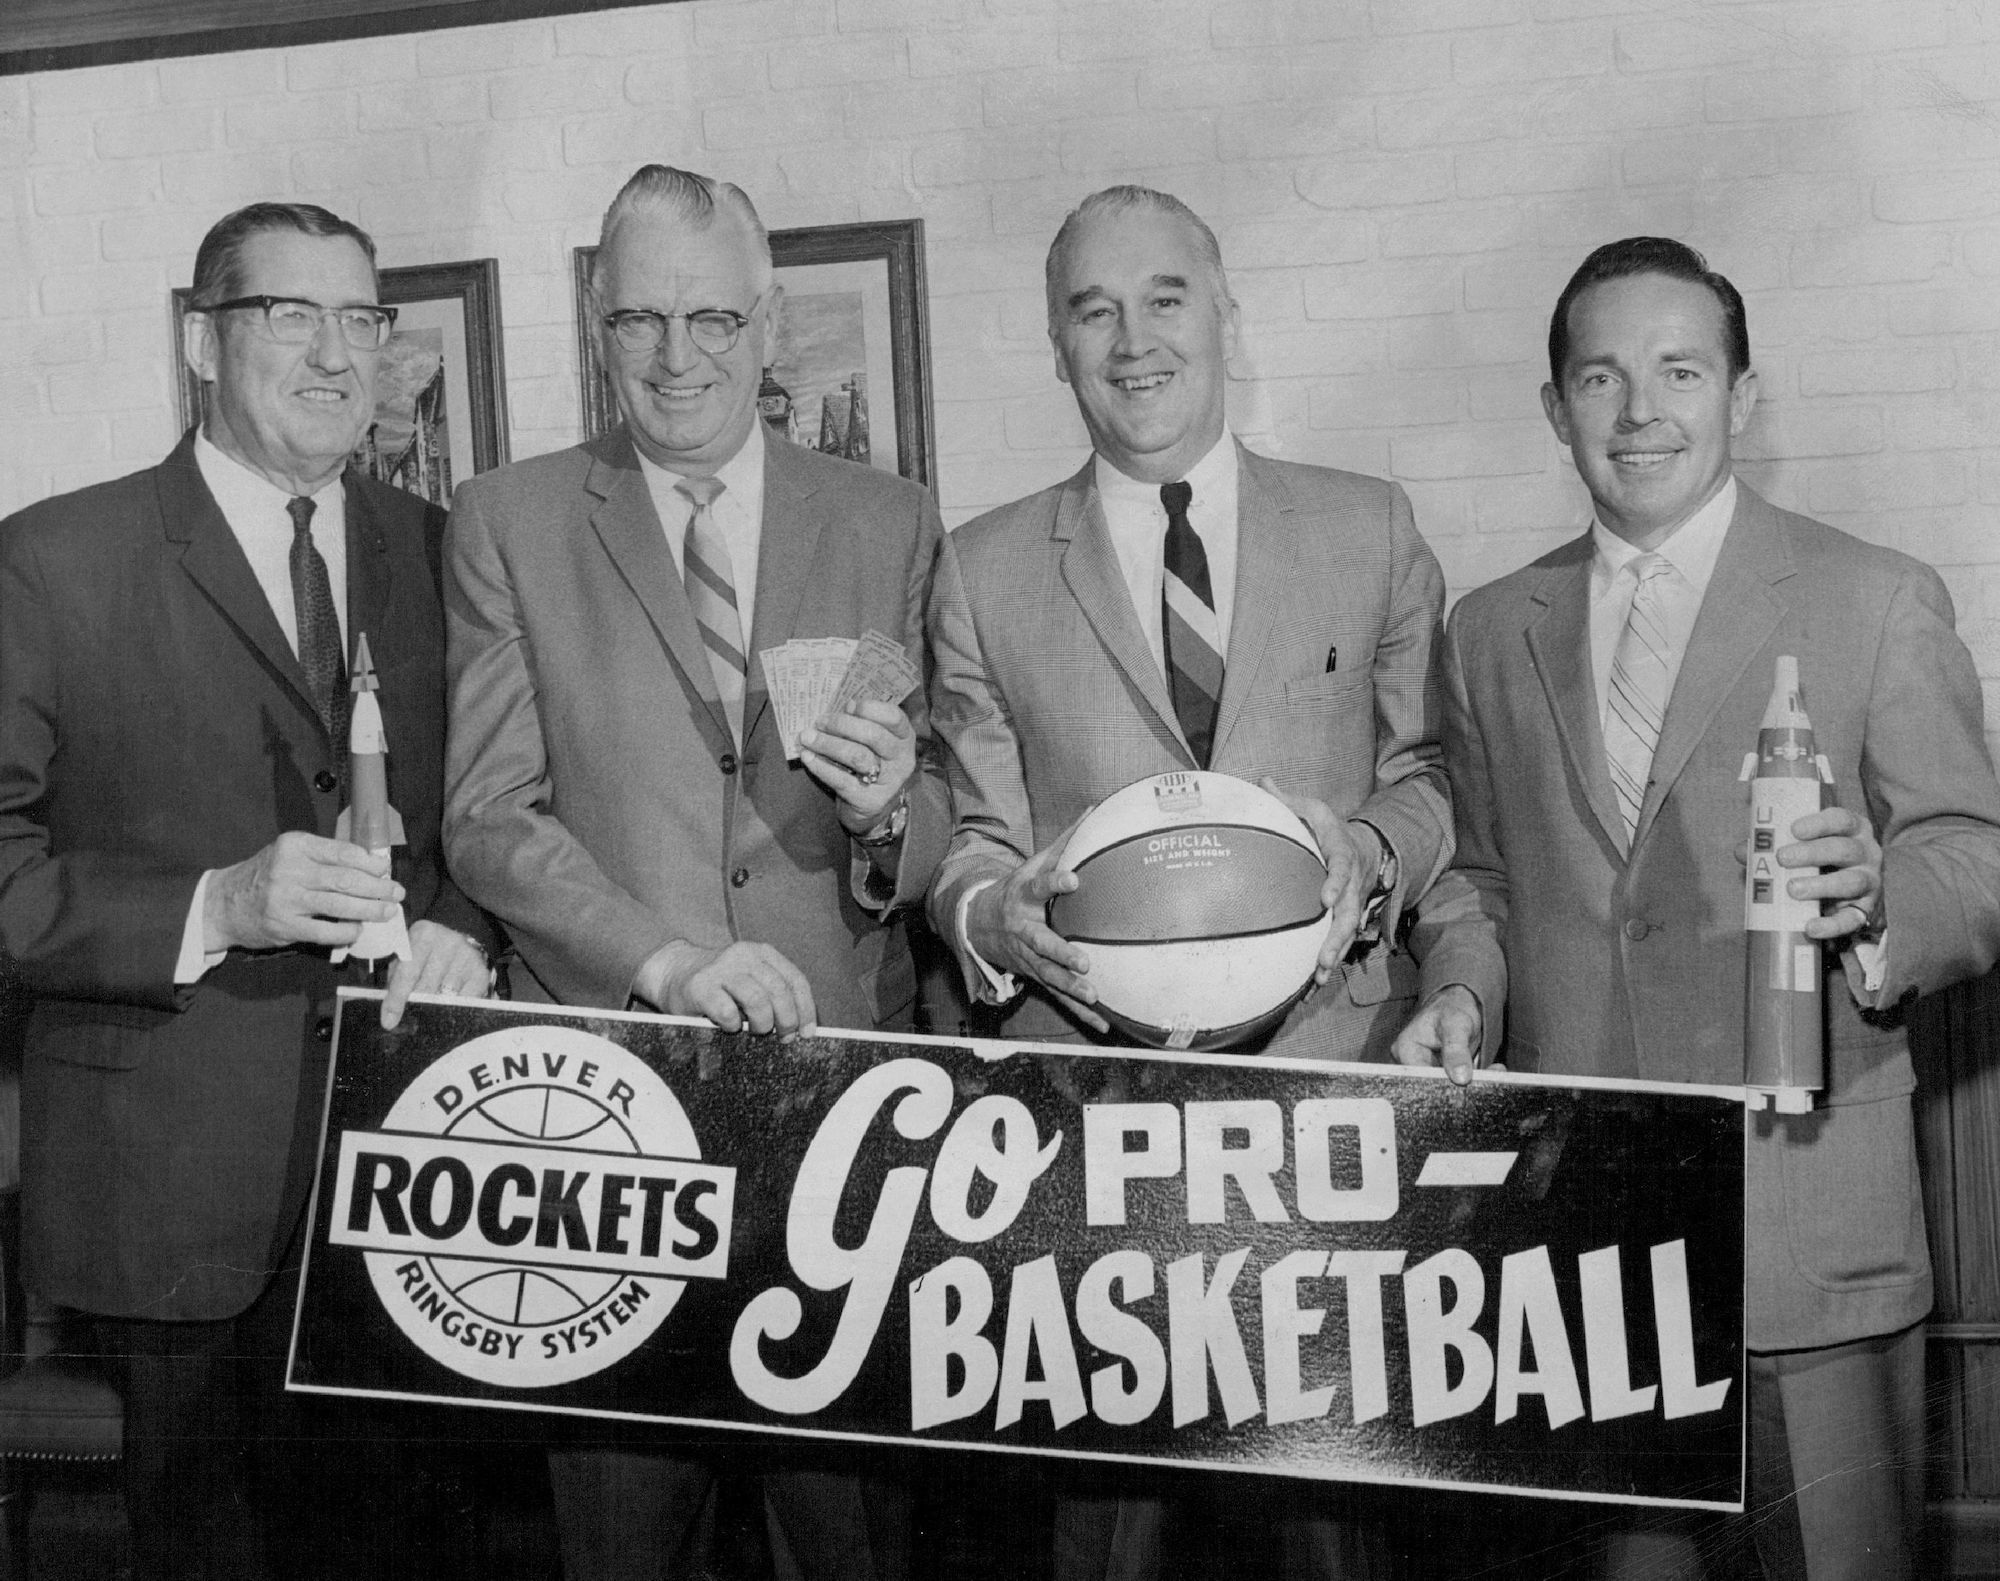 APR 28 1968; READY FOR ROCKET-TICKET CAMPAIGN; Jack Grunwald, right, will serve as general chairman of the Denver Rockets' season-ticket drive that will be launched with an organizational dinner meeting for 60 area businessmen Monday evening at the Denver Athletic Club. Grunwald headed last year's drive that set an ABA high of nearly 700 season tickets. Mapping plans are, from left. Rockets owner J. W. Ringsby, cochairmen Max Moore and Frank Byrne.; (Photo By The Denver Post via Getty Images)